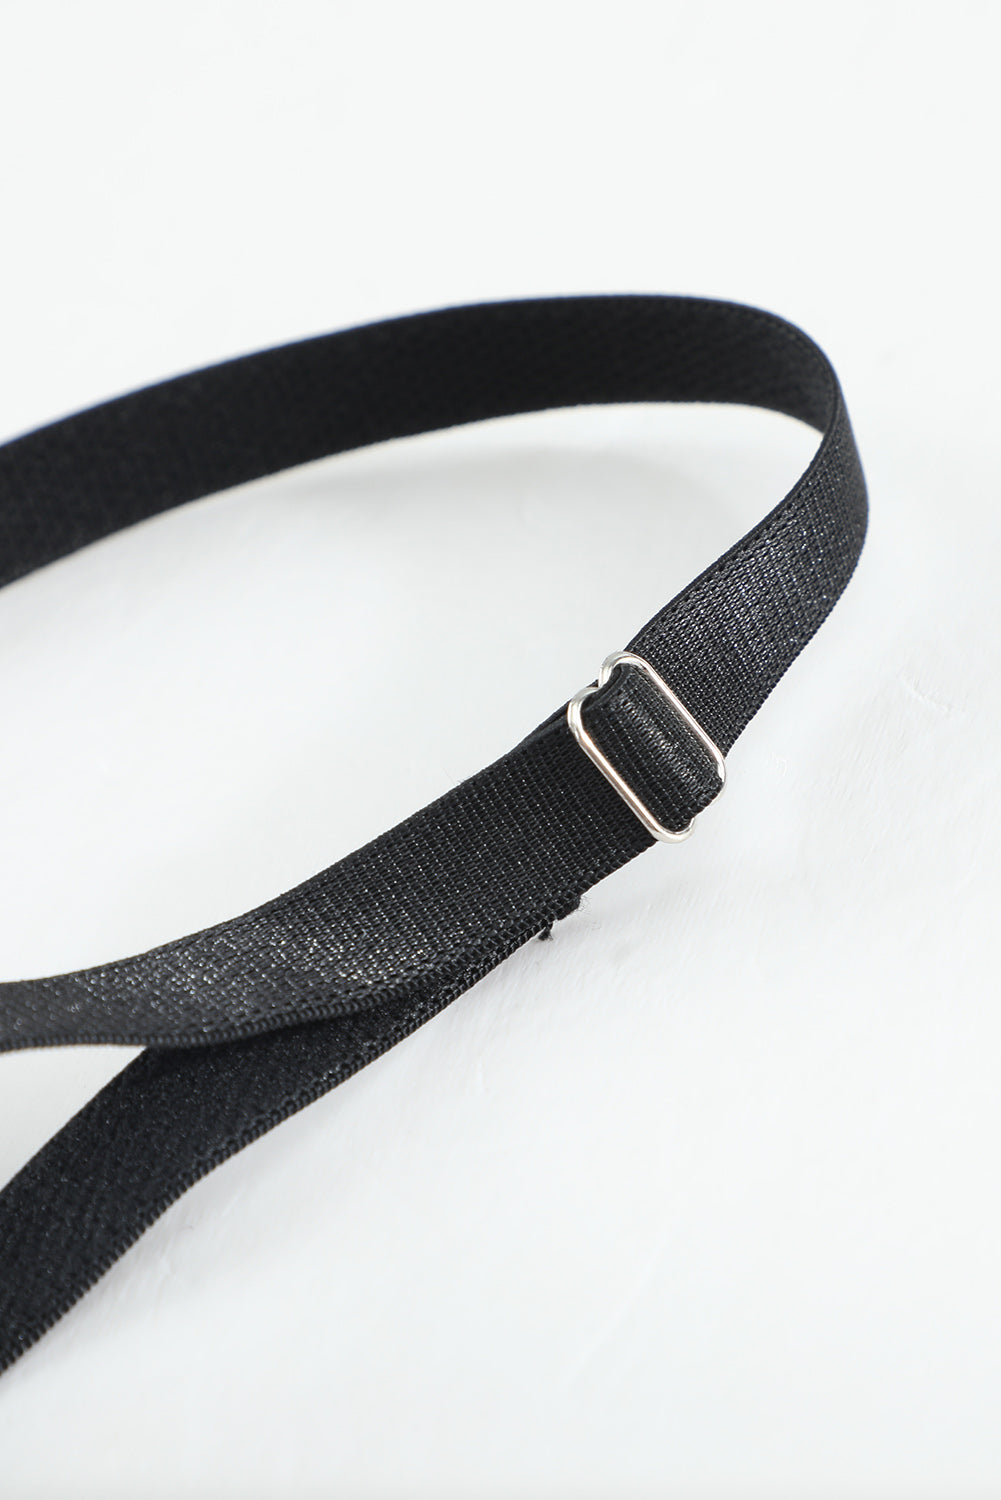 a close up of a black belt on a white surface